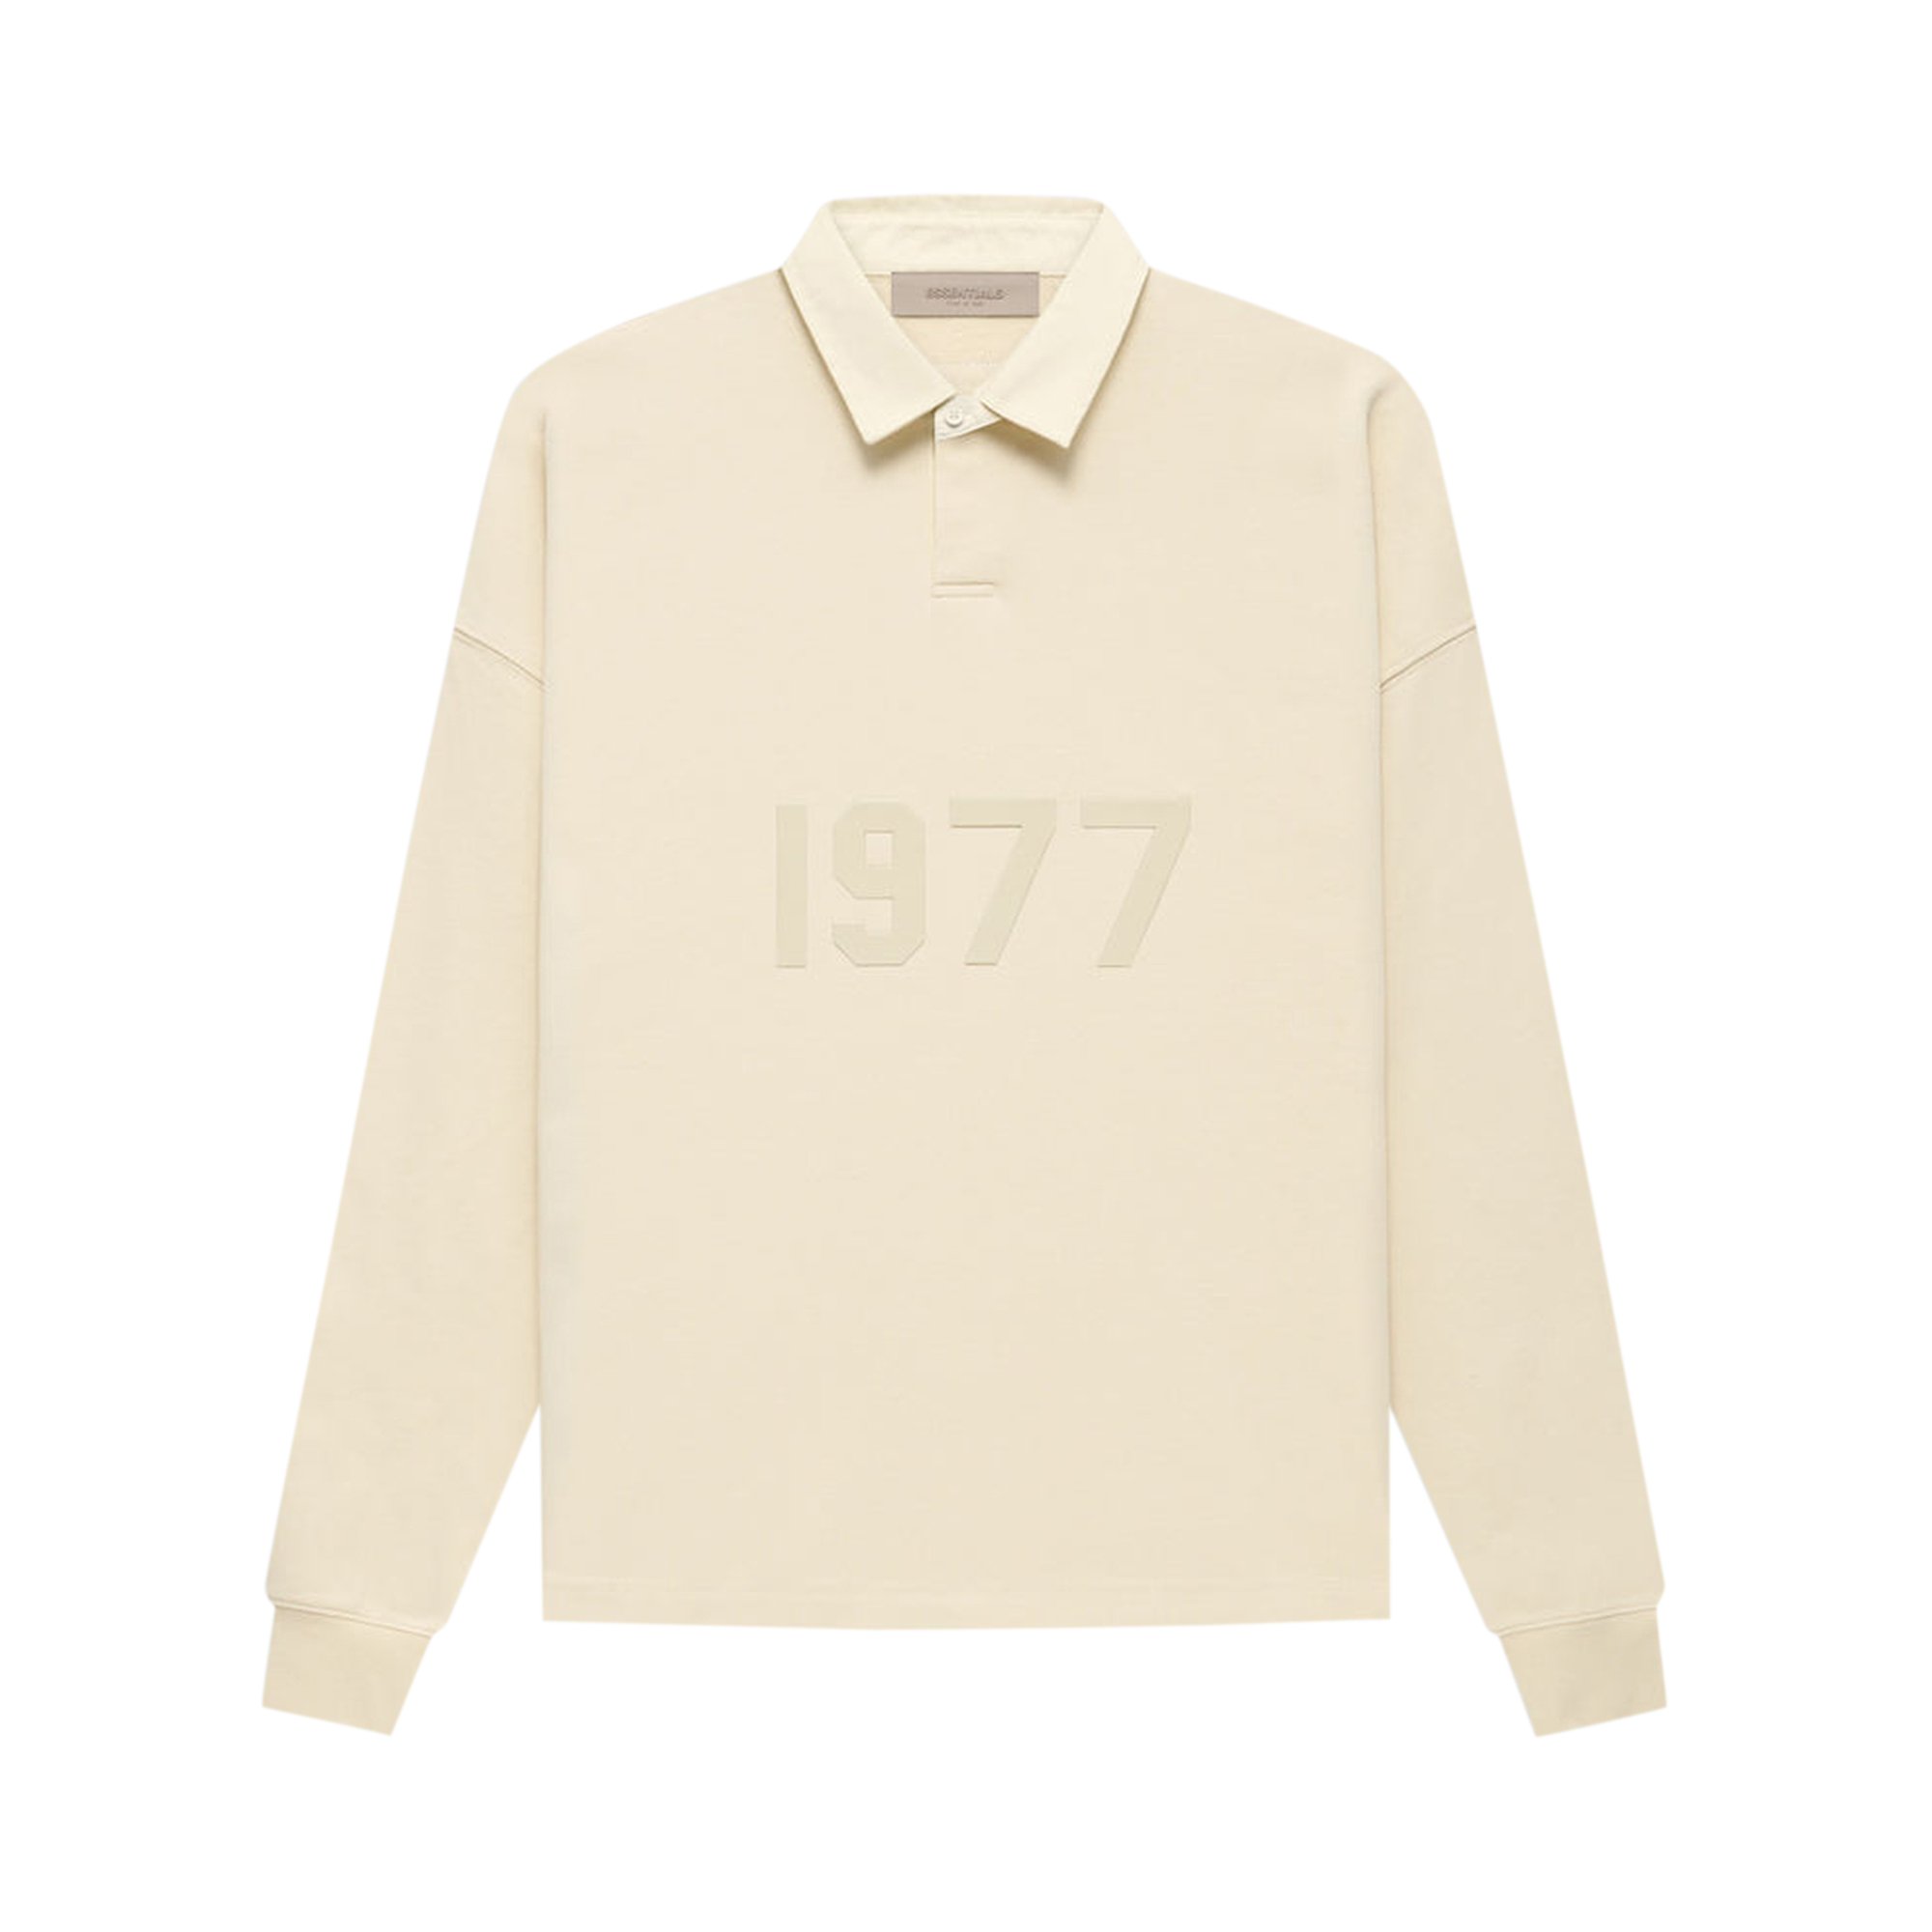 Fear of God Essentials Henley Rugby 'Egg Shell' | GOAT